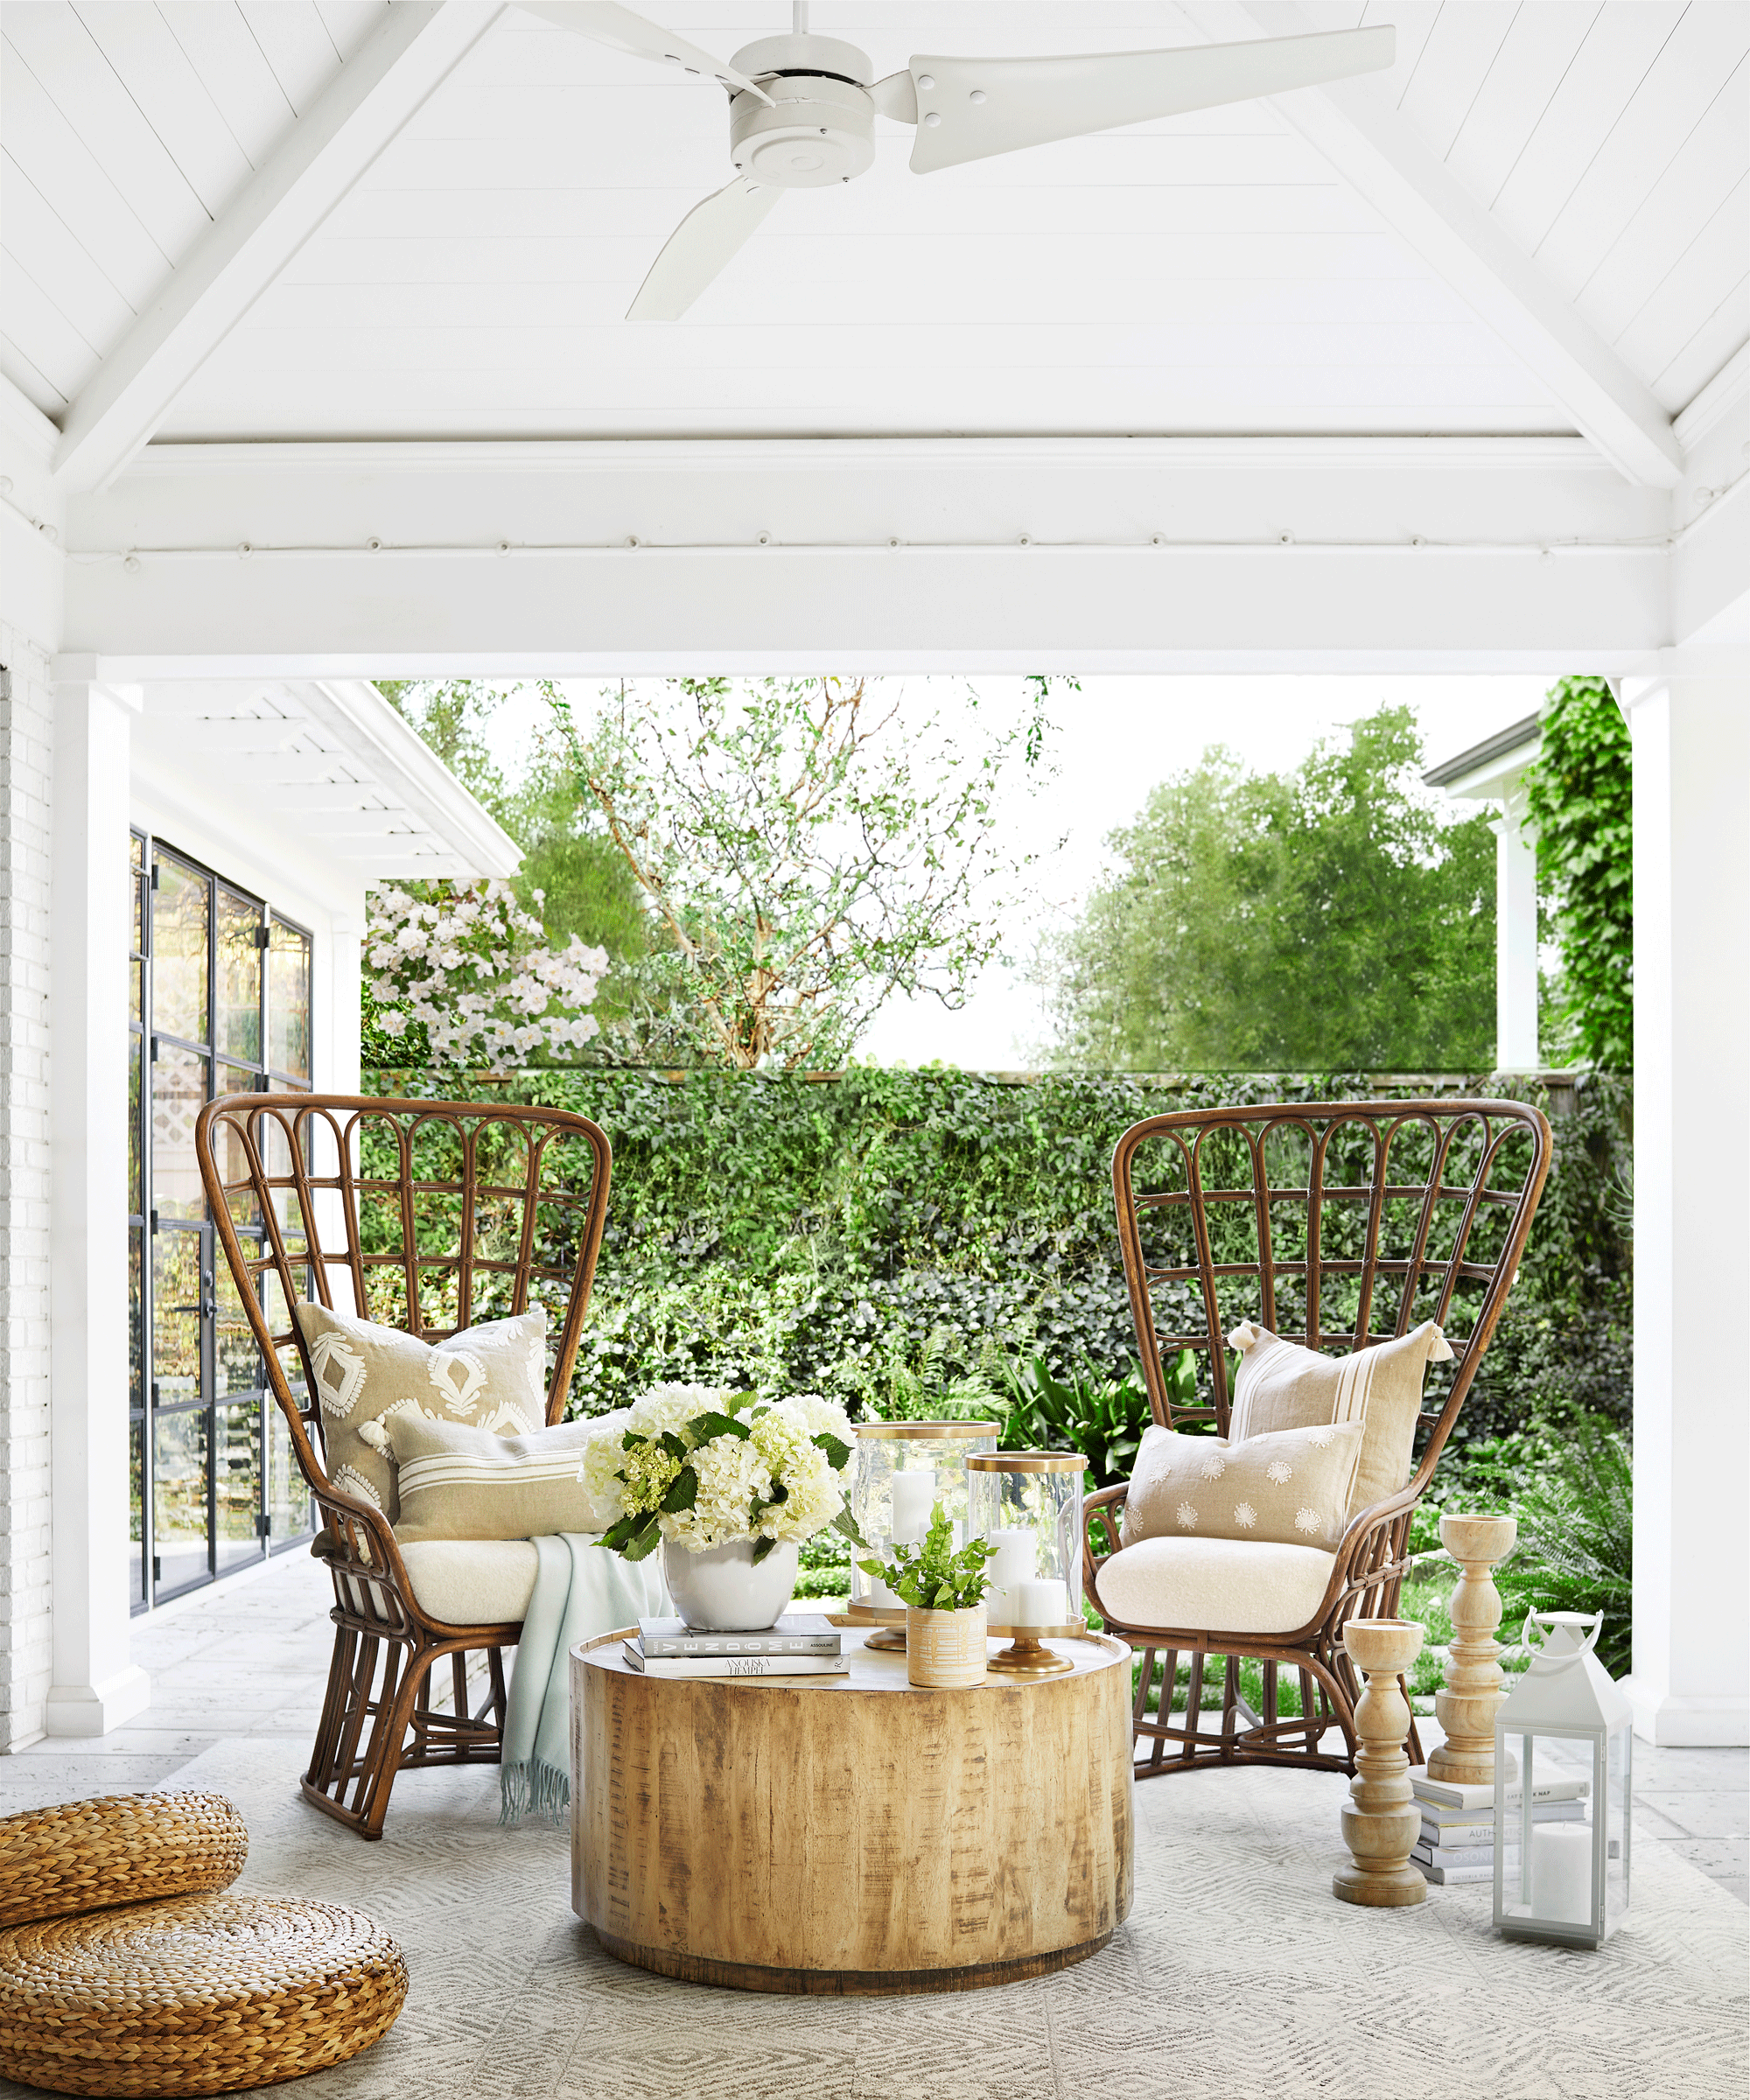 Natural porch style with rustic materials, peacock style cane chairs, and wooden round coffee table.